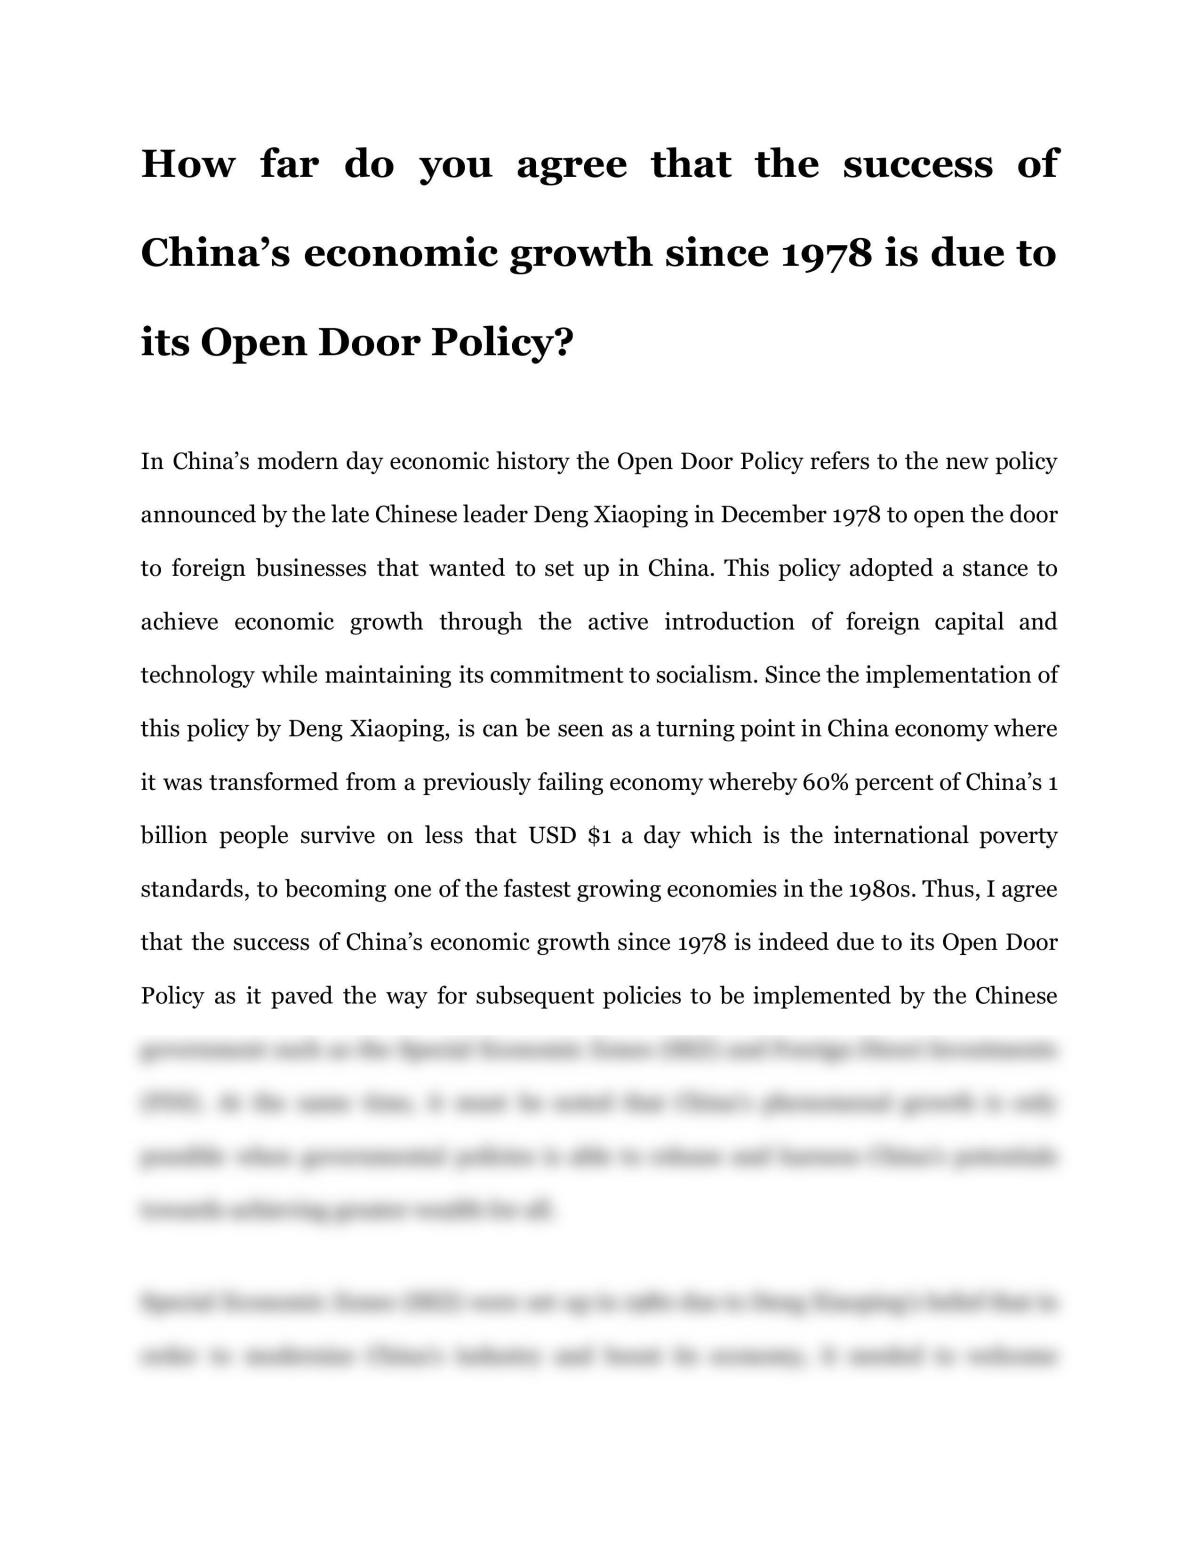 How far do you agree that the success of China's economic growth since 1978 is due to its open door policy - Page 1